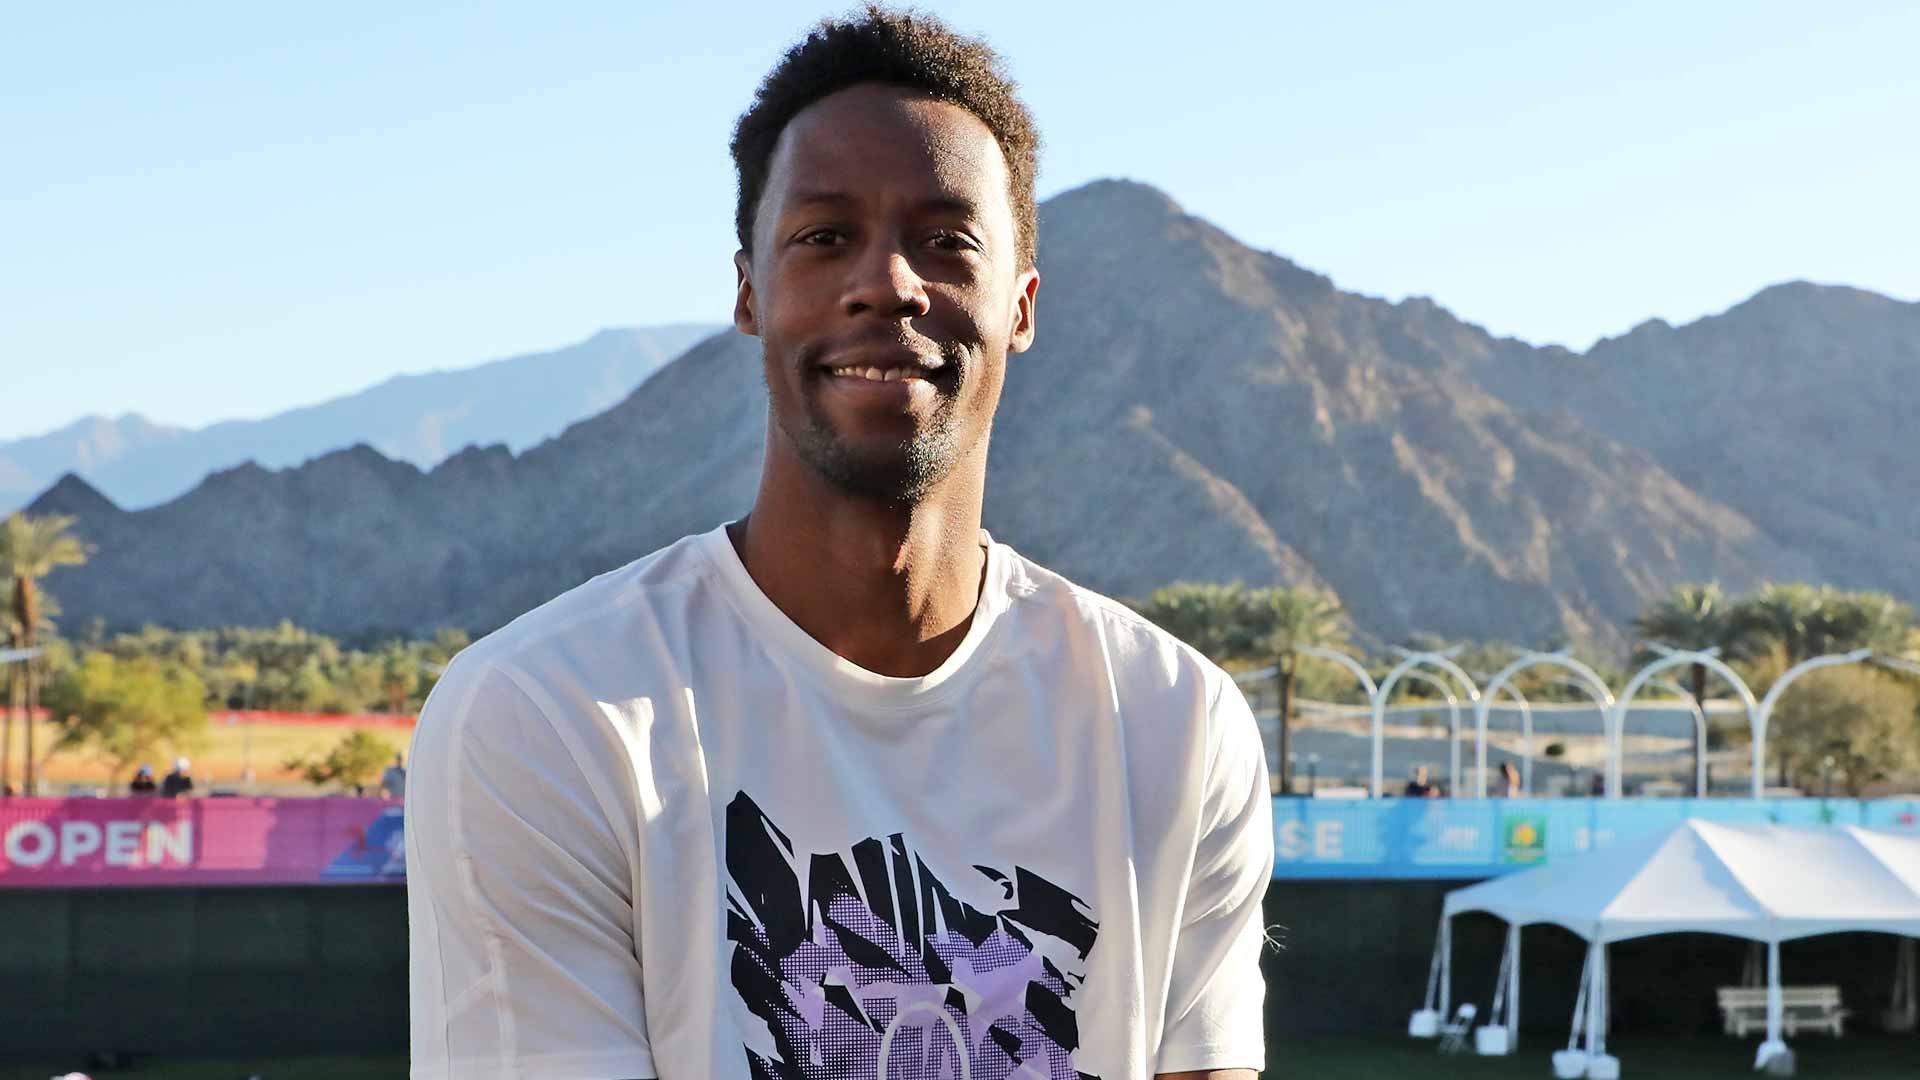 Gael Monfils is competing at Indian Wells, his first tournament in seven months.